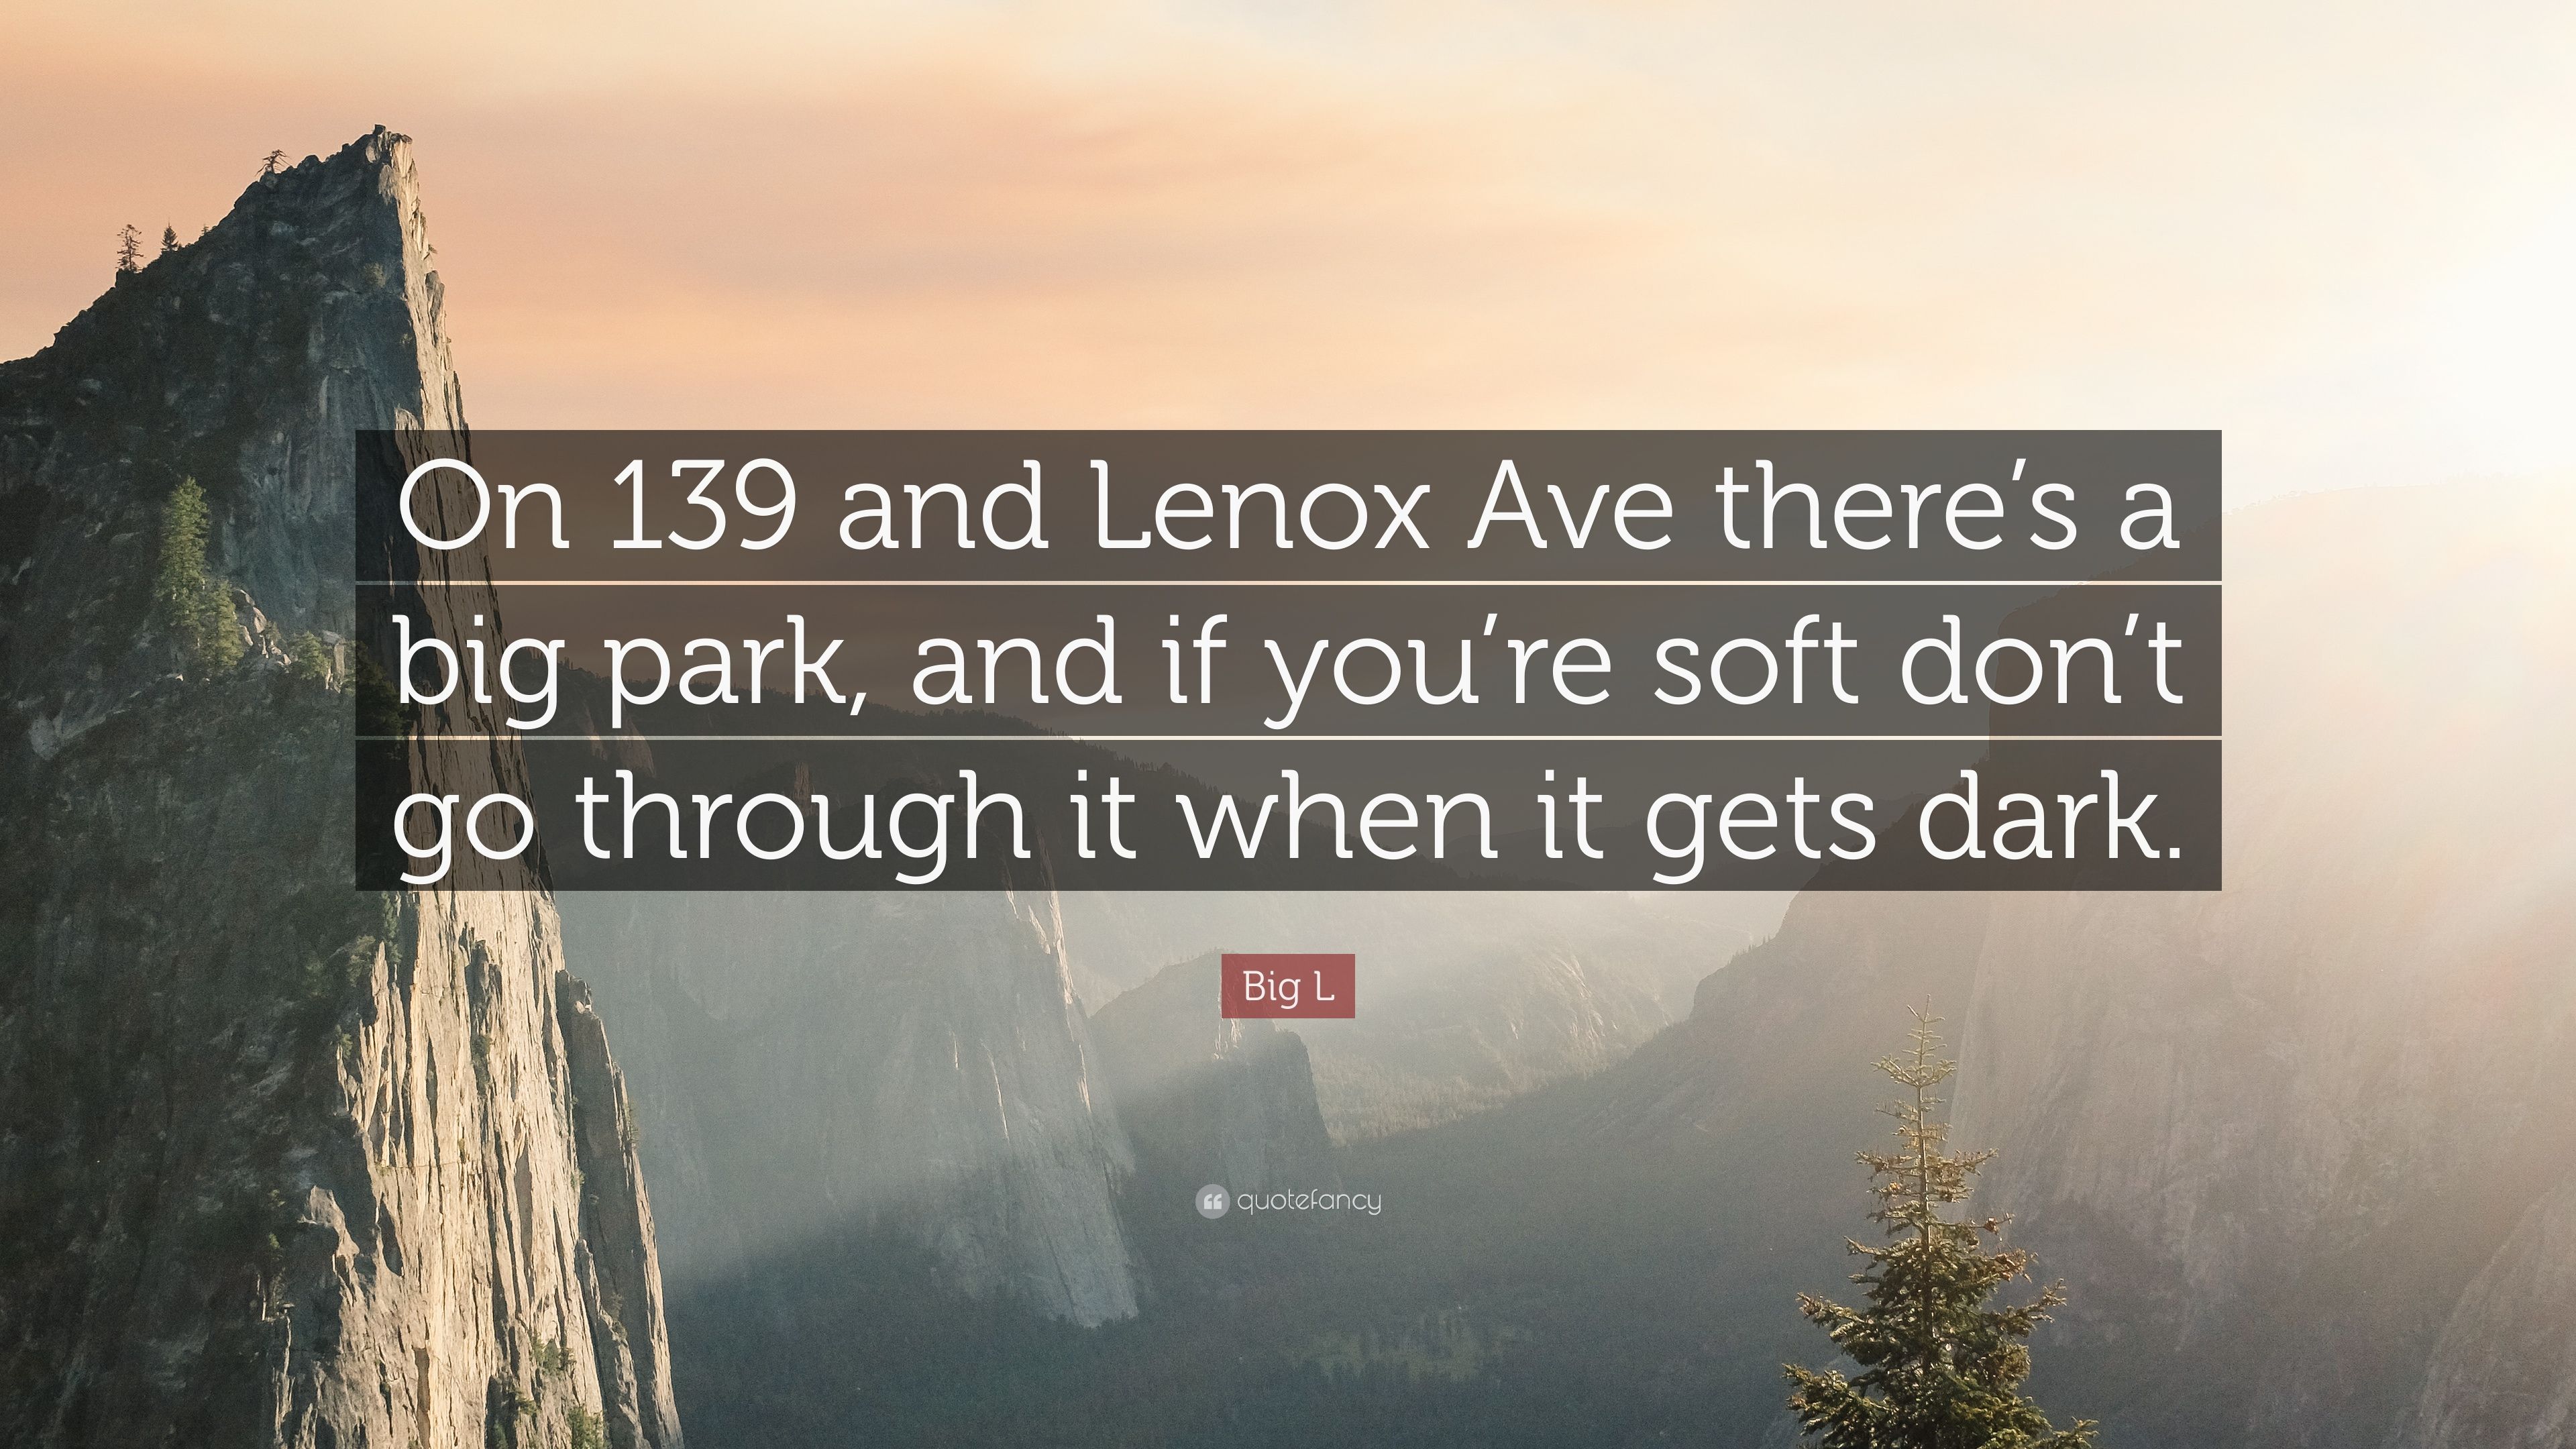 Big L Quote: “On 139 and Lenox Ave there's a big park, and if you're soft don't go through it when it gets dark.” (7 wallpaper)